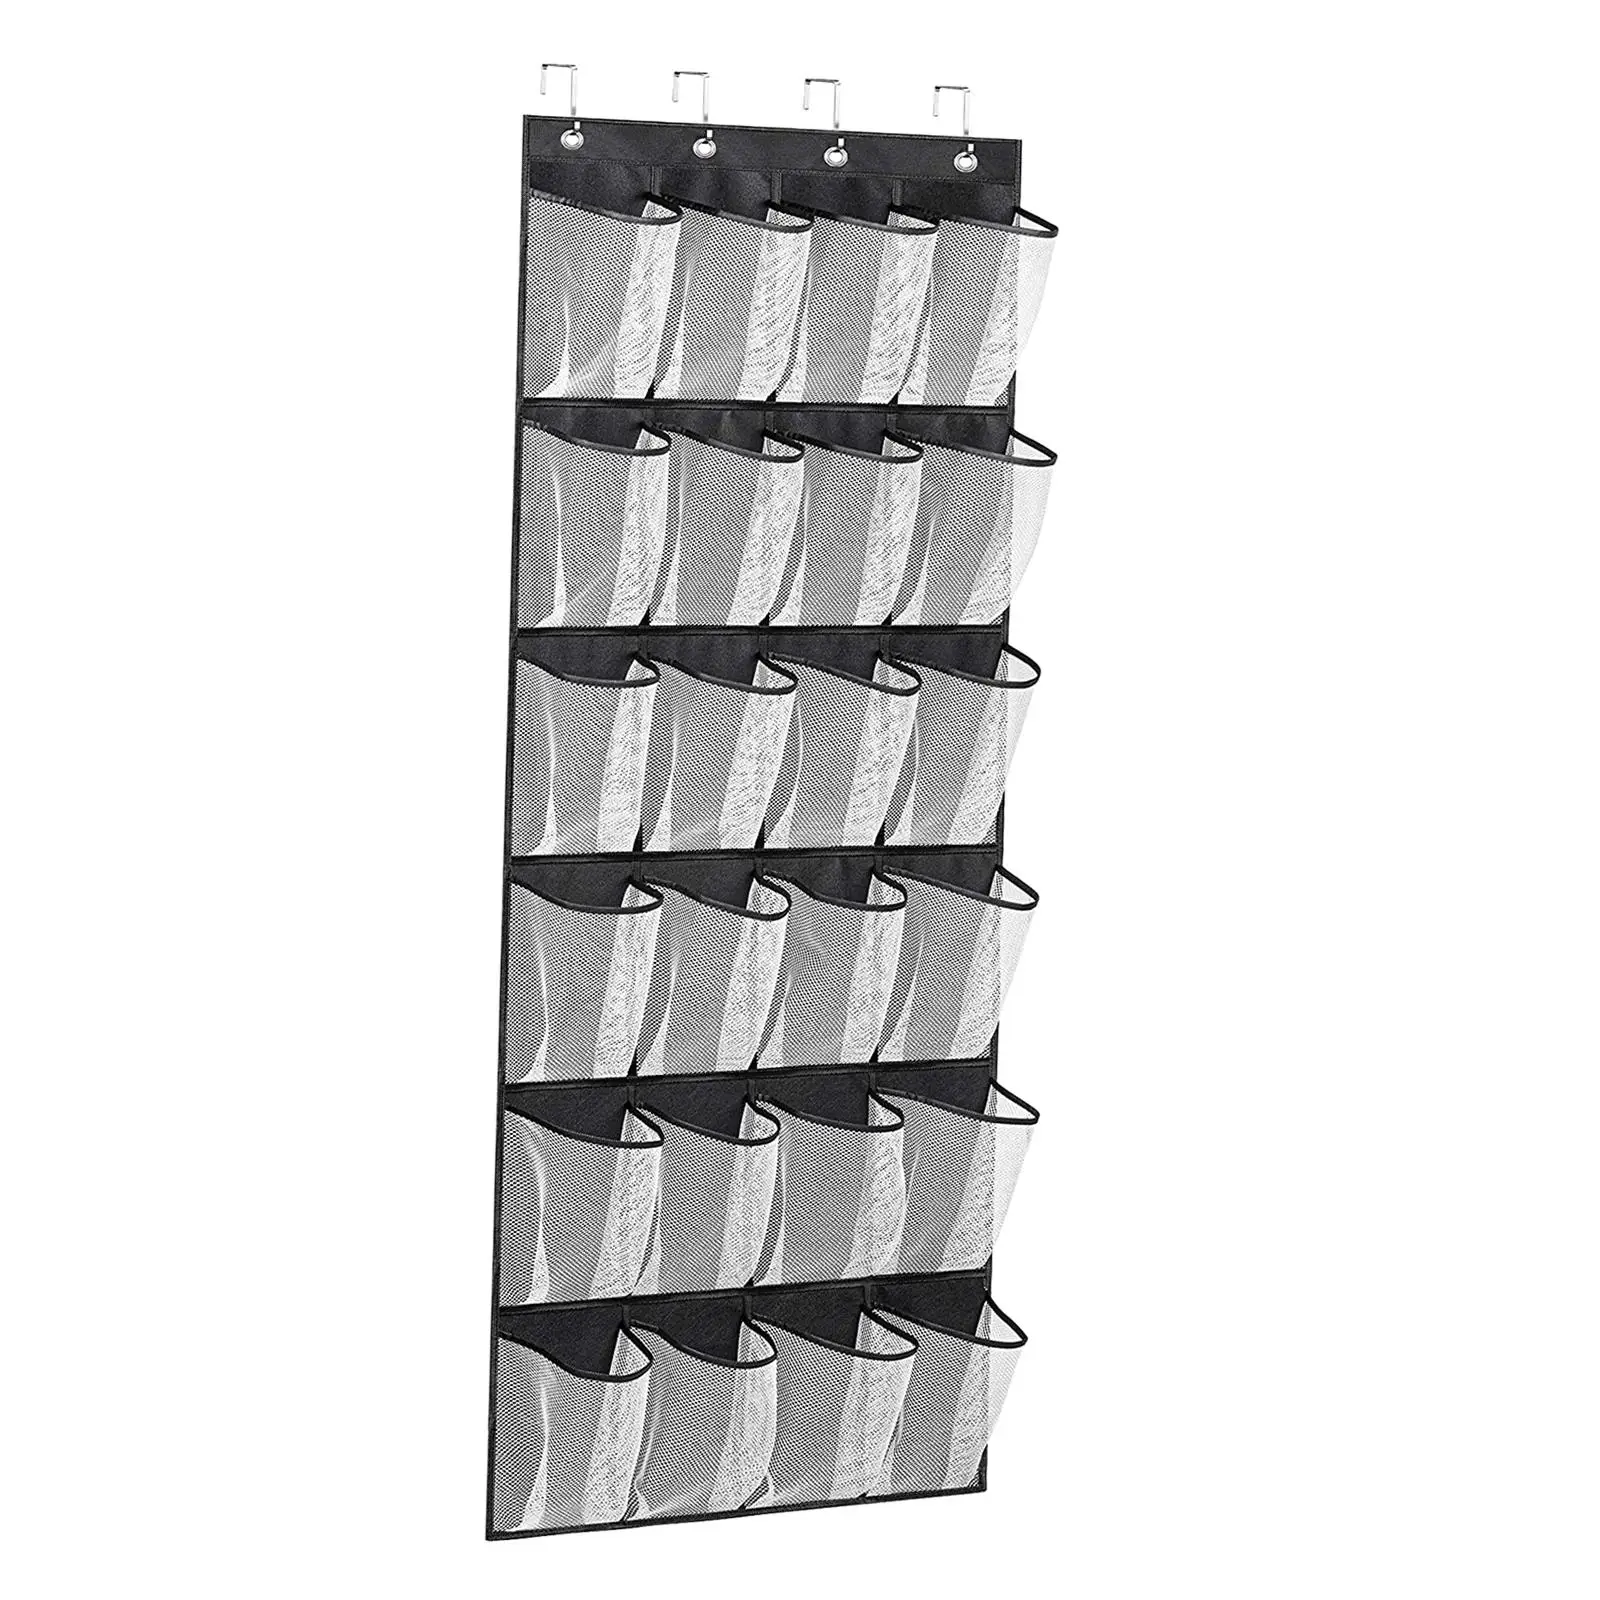 Hanging Shoe Organizer 4 Hooks Accessory 24 Pouches Foldable Durable Over The Door Hanging Shoe Organizer for Living Room Door